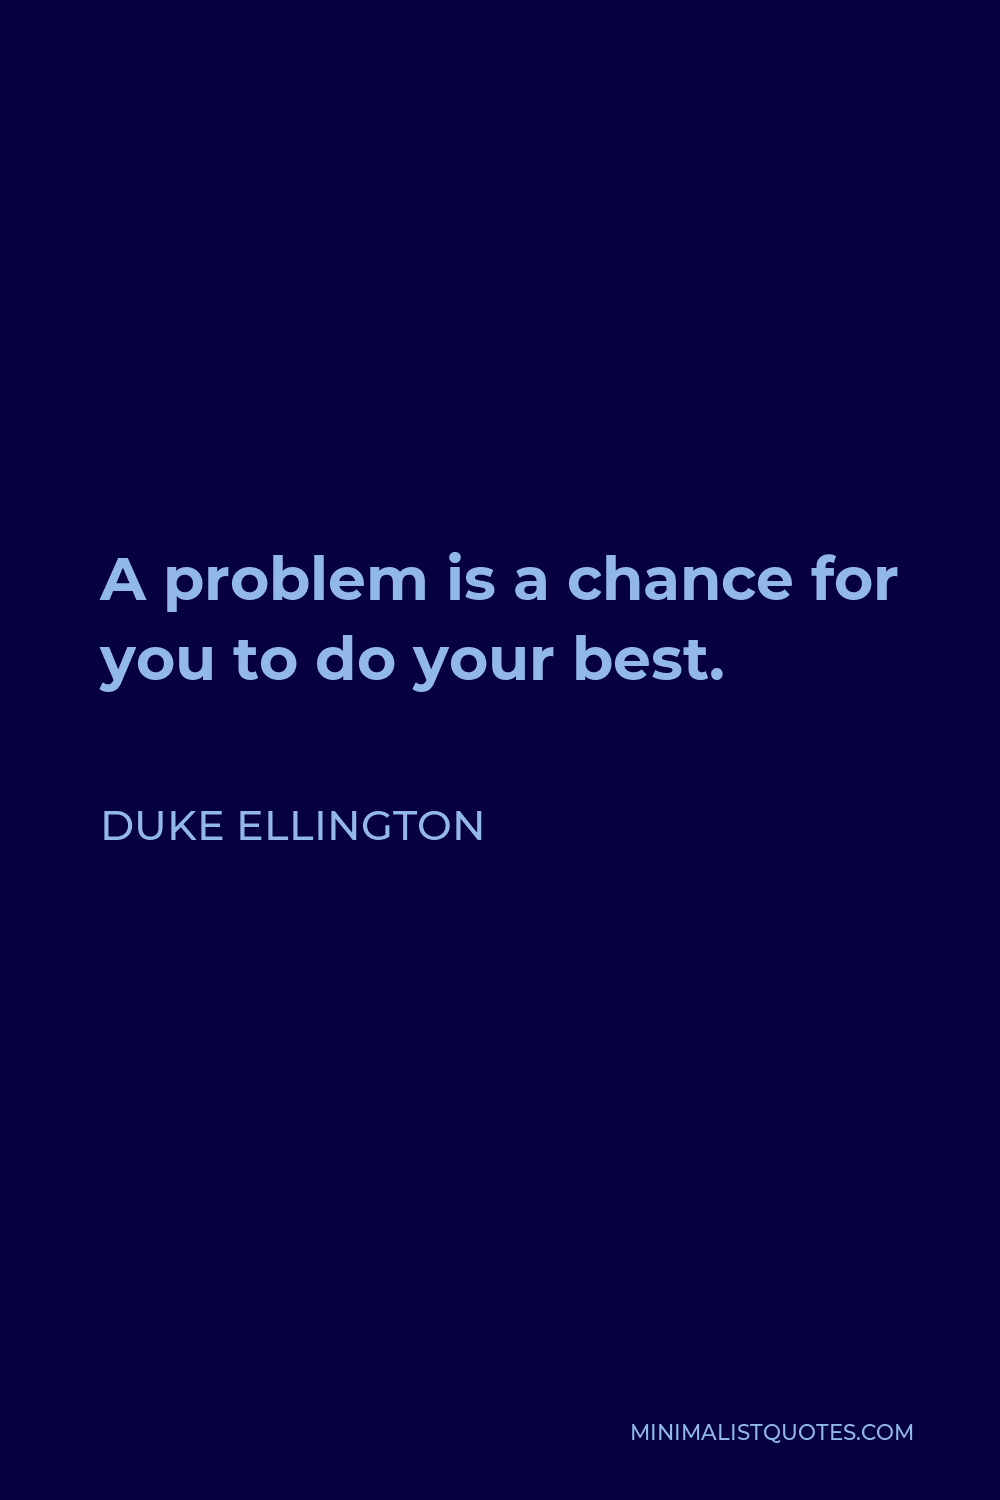 Duke Ellington Quote - A problem is a chance for you to do your best.